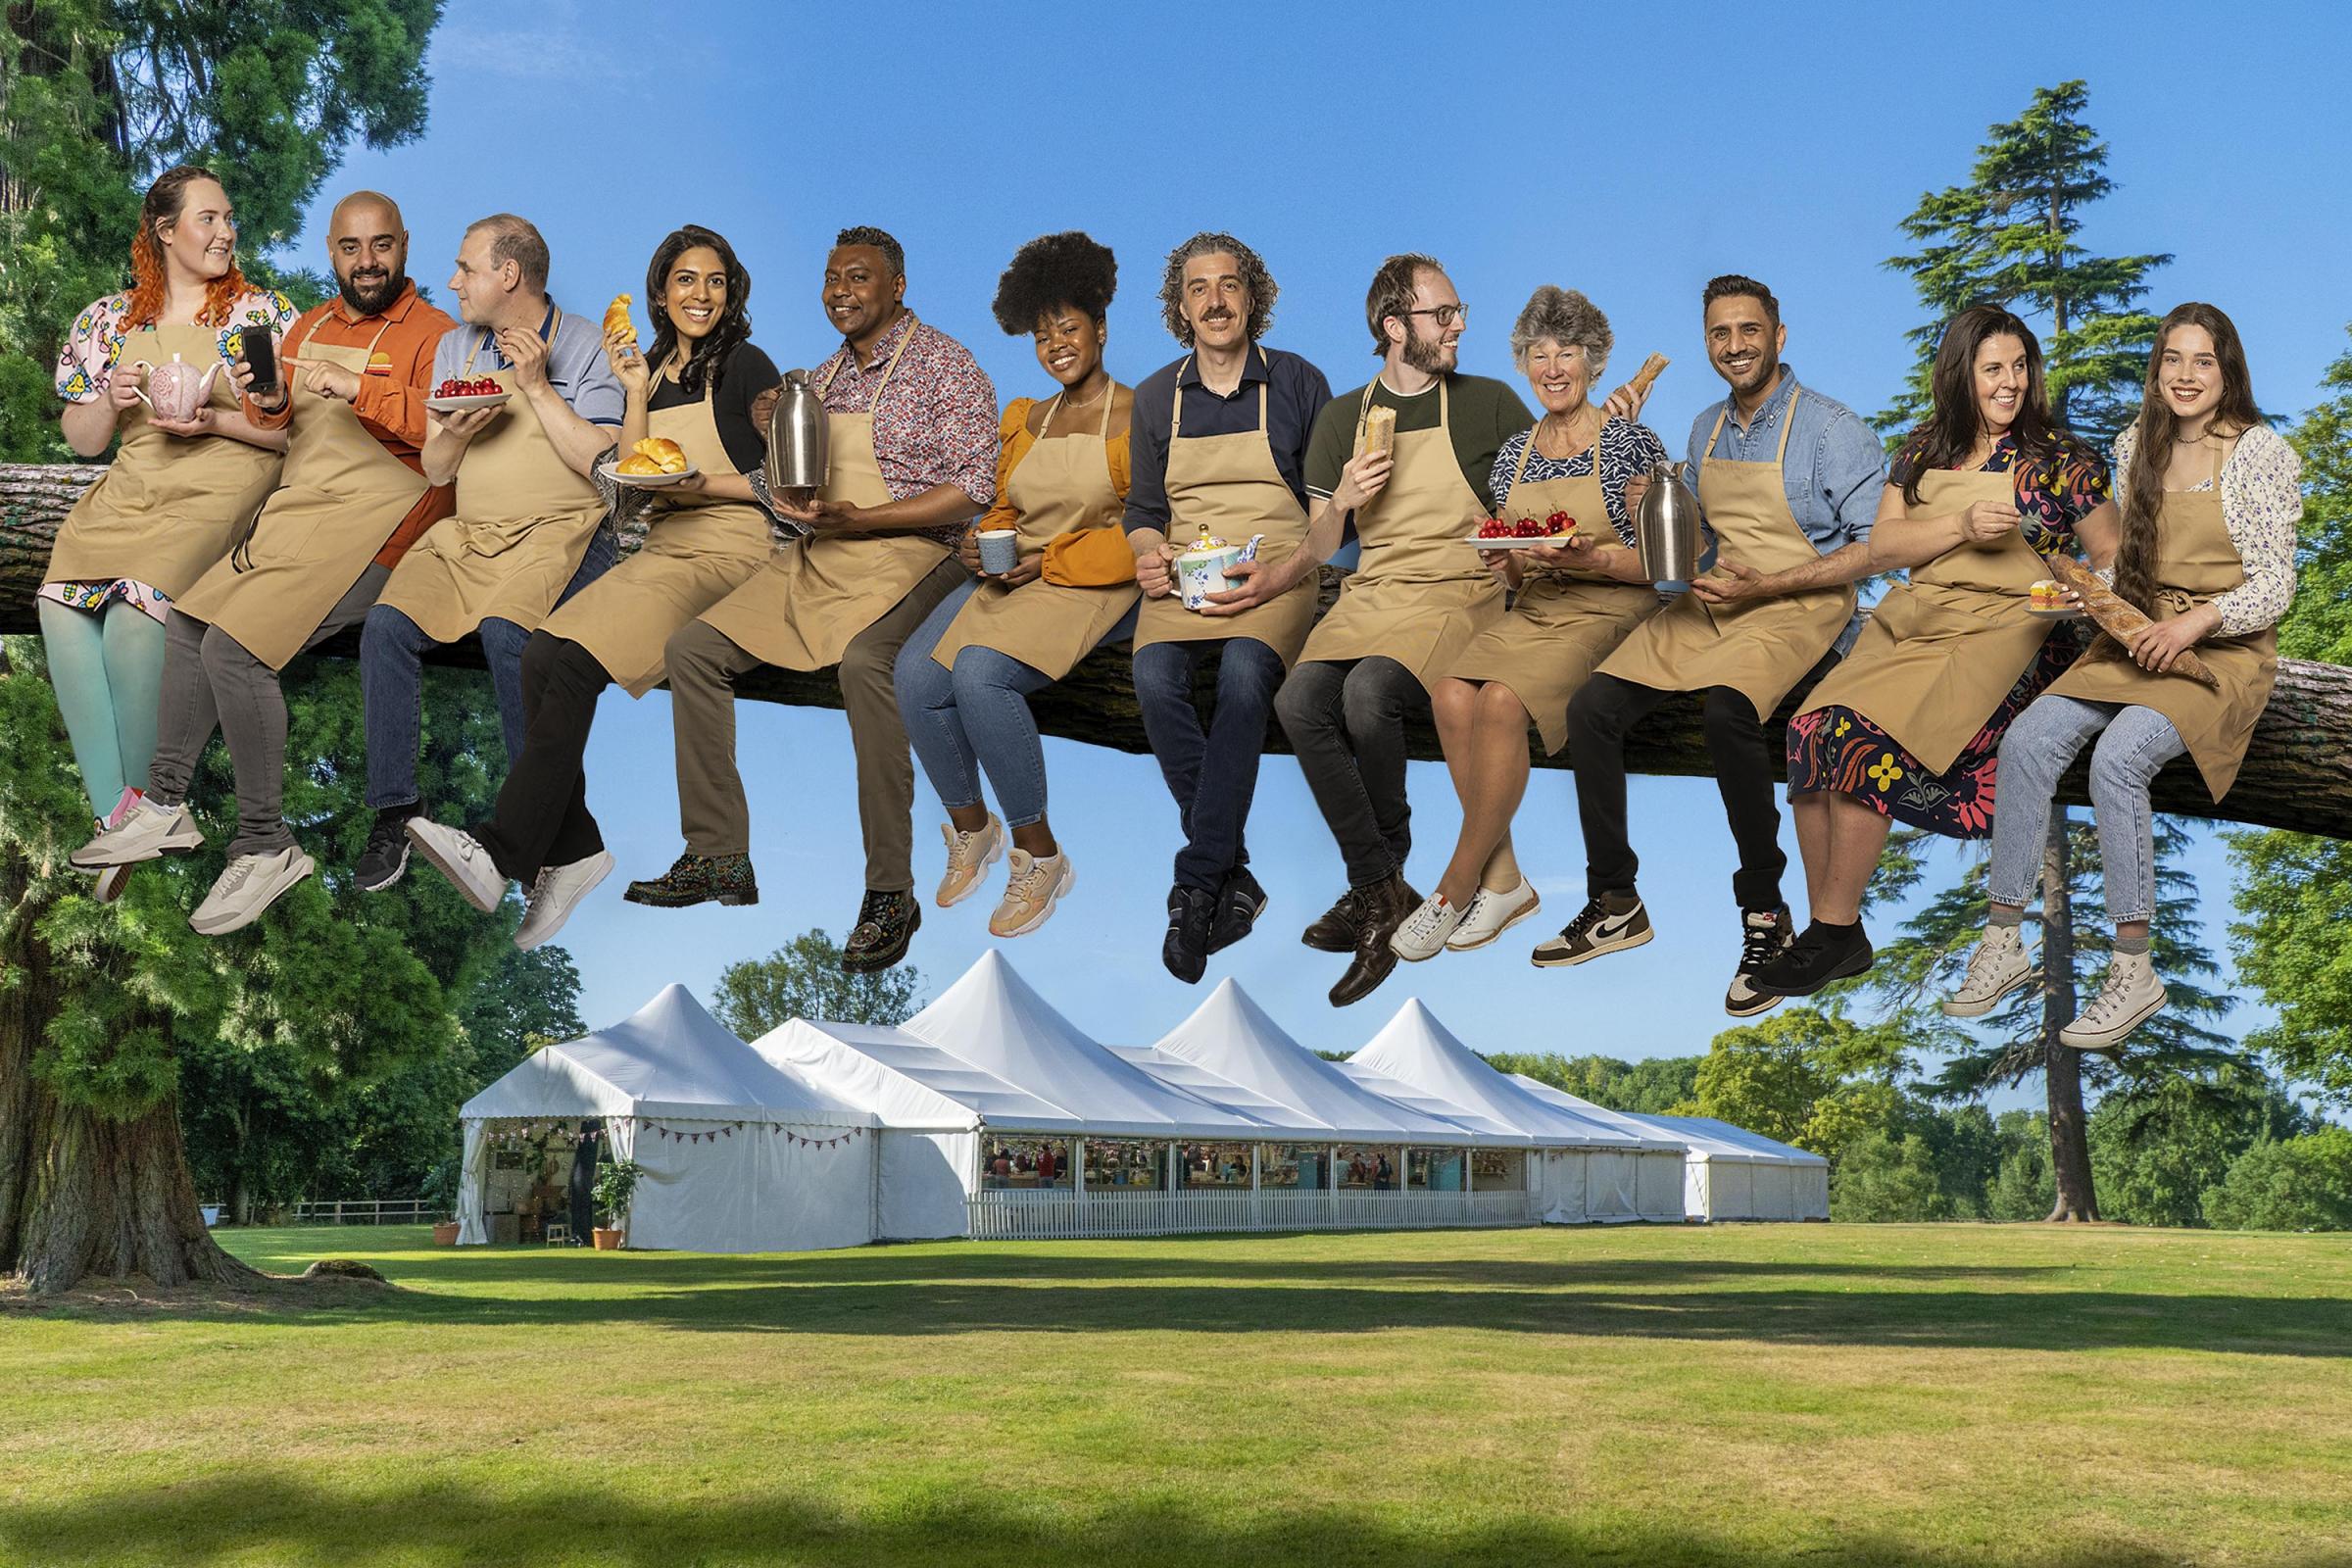 Undated handout photo issued by C4/Love Productions of (L-R) Elizabeth, George, Juergen, Crystelle, Jairzeno, Rochica, Giuseppe, Tom, Maggie, Chirag, Amanda and Freya from The Great British Bake Off 2021.